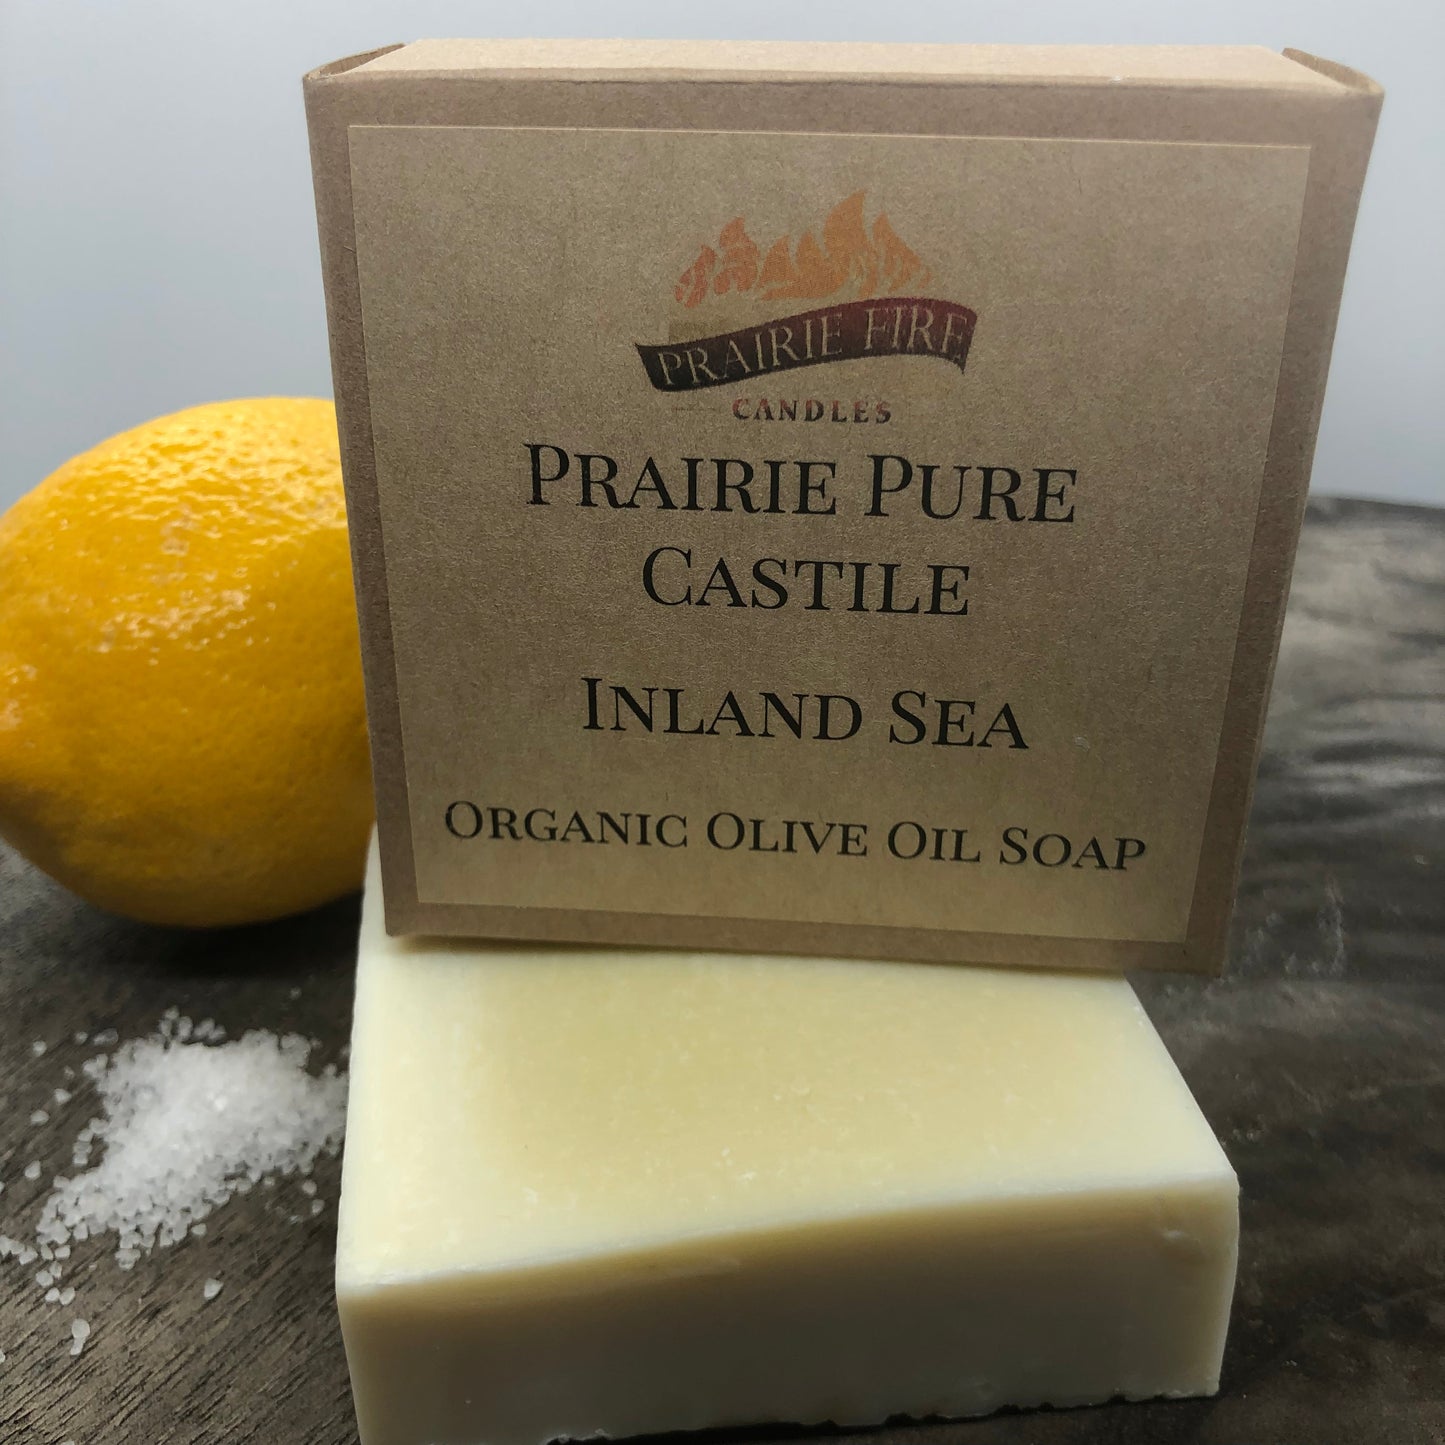 Inland Sea Real Castile Organic Olive Oil Soap for Sensitive Skin - Dye Free - 100% Certified Organic Extra Virgin Olive Oil